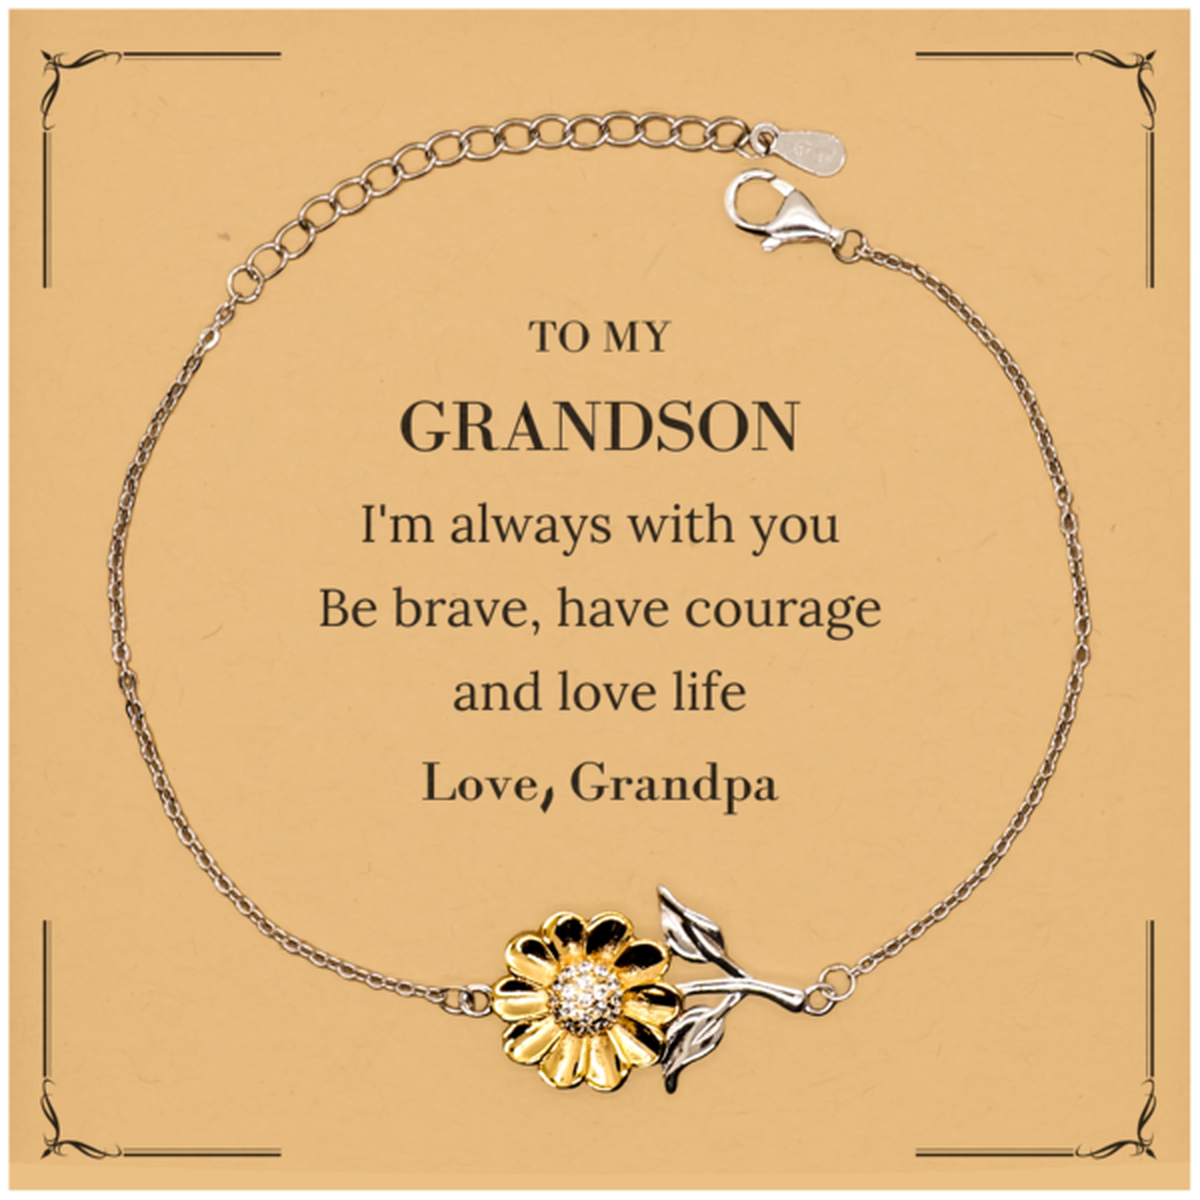 To My Grandson Gifts from Grandpa, Unique Sunflower Bracelet Inspirational Christmas Birthday Graduation Gifts for Grandson I'm always with you. Be brave, have courage and love life. Love, Grandpa